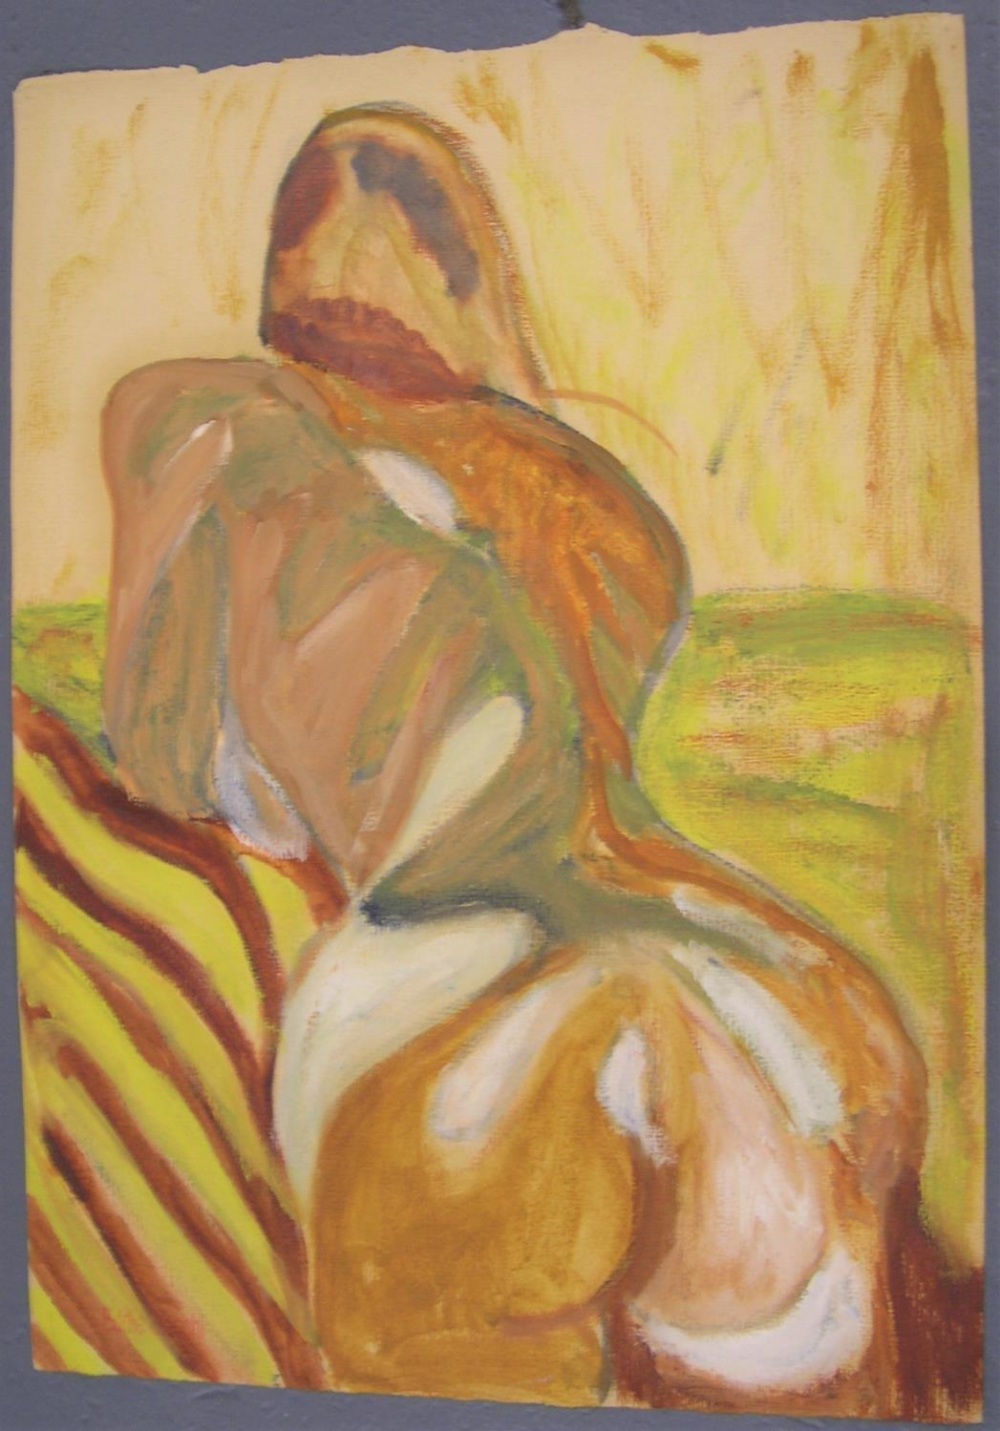 Eddie Bianchi (Newcastle-Upon-Tyne active 1975-1995) "Back of reclining female nude", oils on paper,